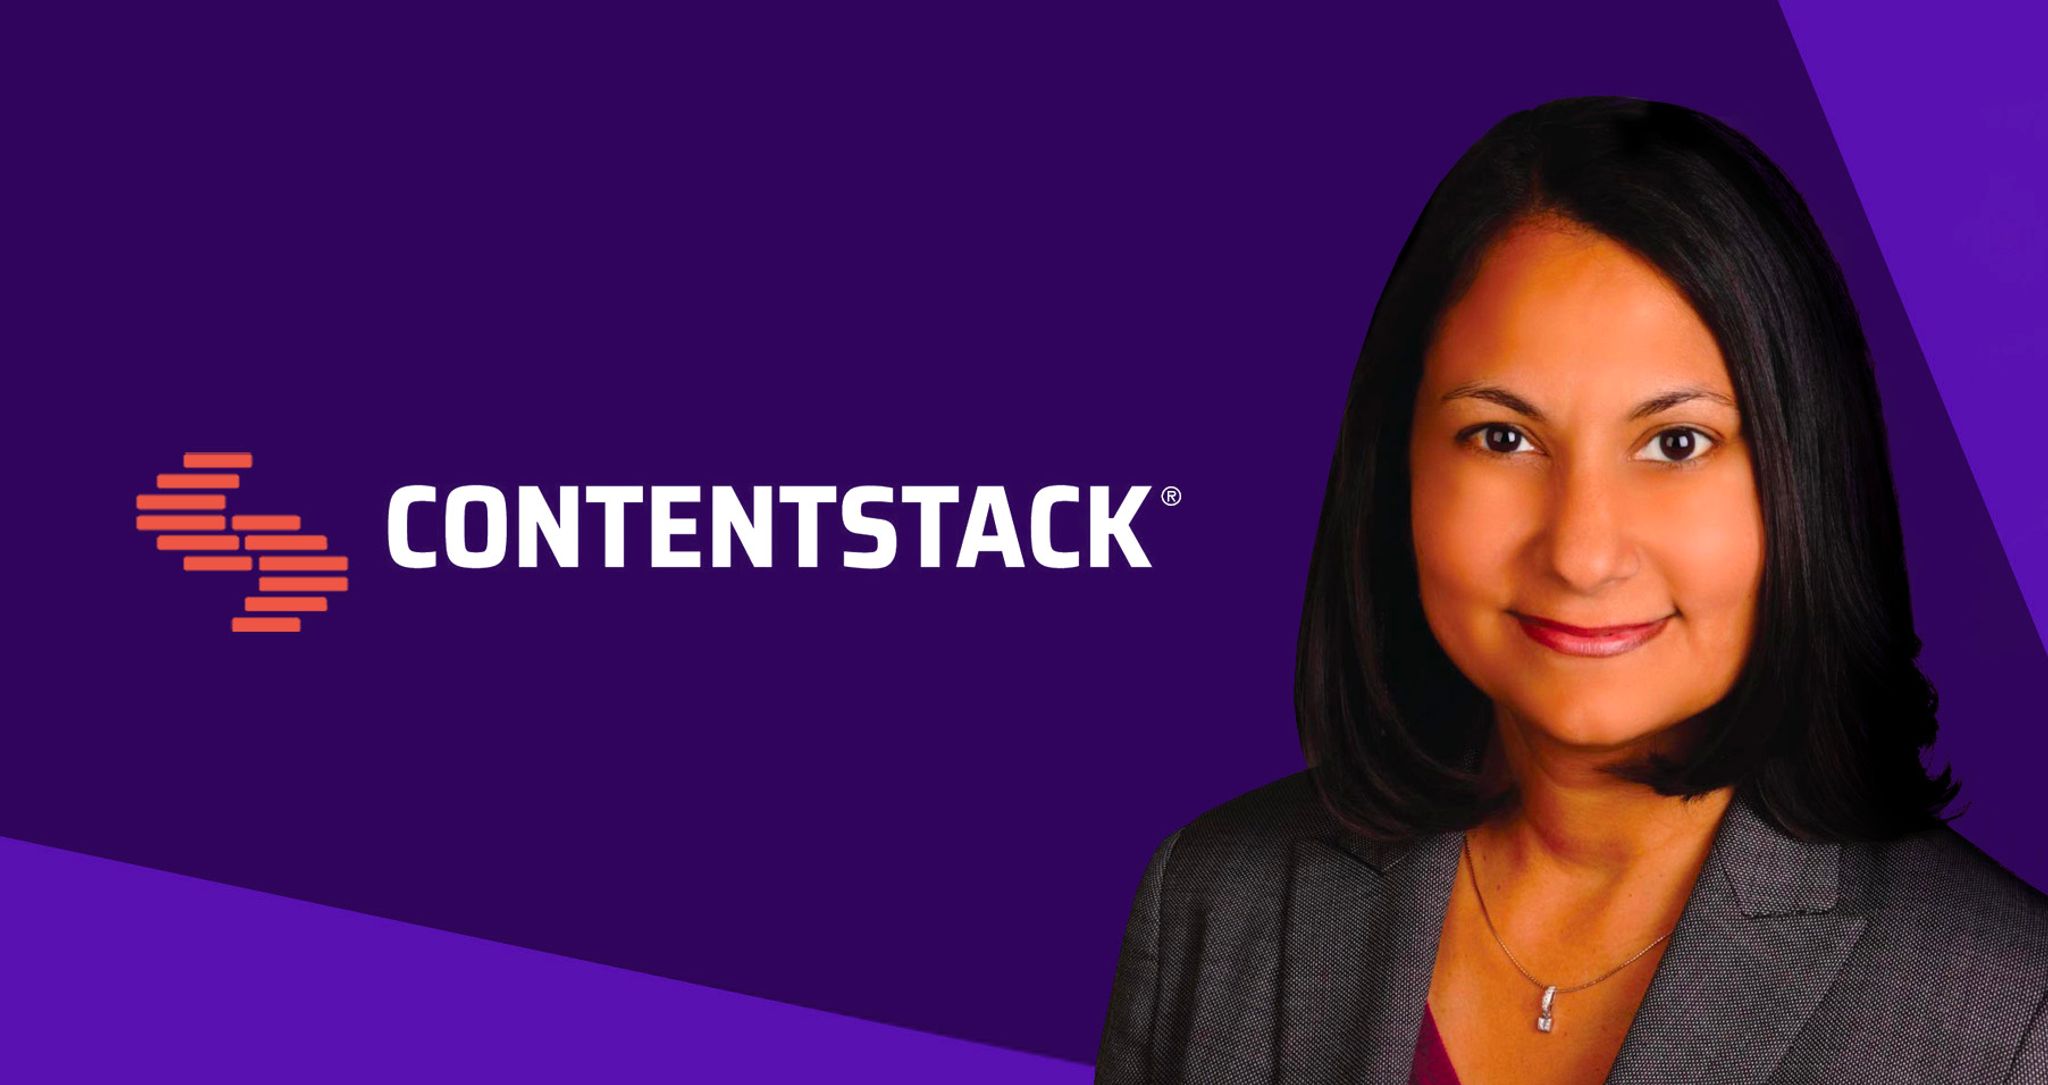 Contentstack logo with image of Neha Sampat, CEO